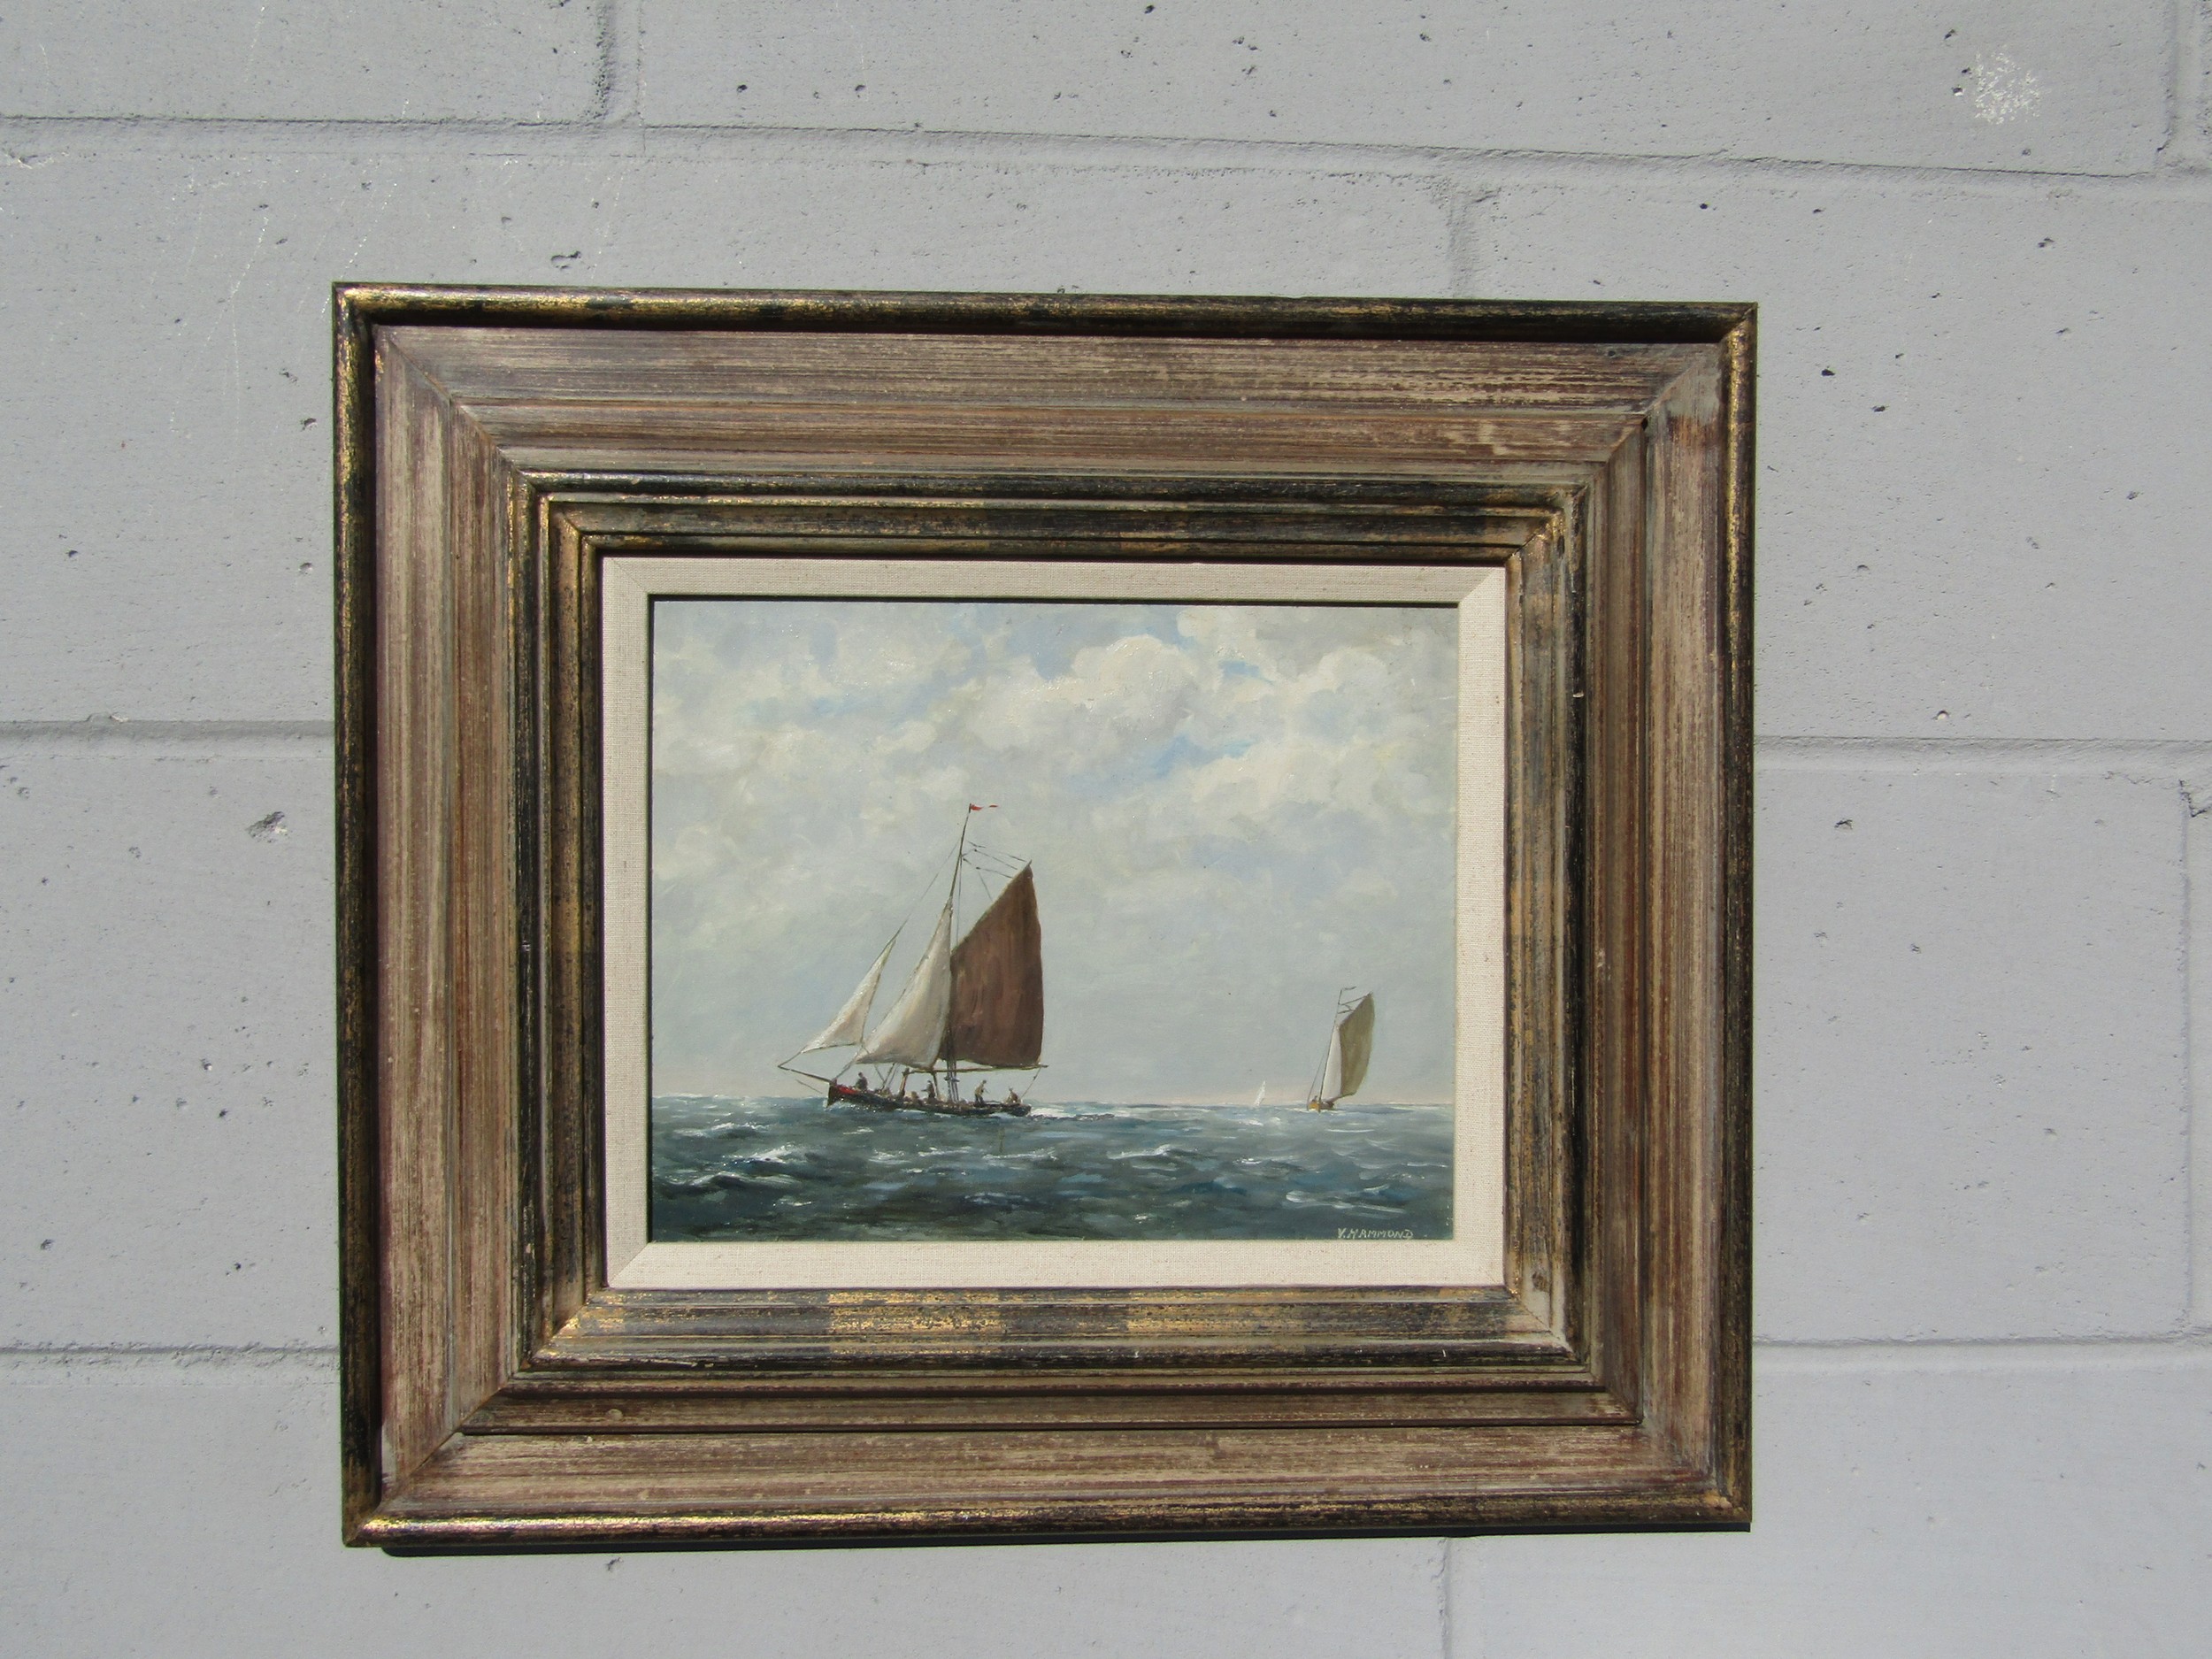 ALFRED VAVASOUR HAMMOND (1900-1985): A framed oil on board of sailing boats. Signed bottom right.